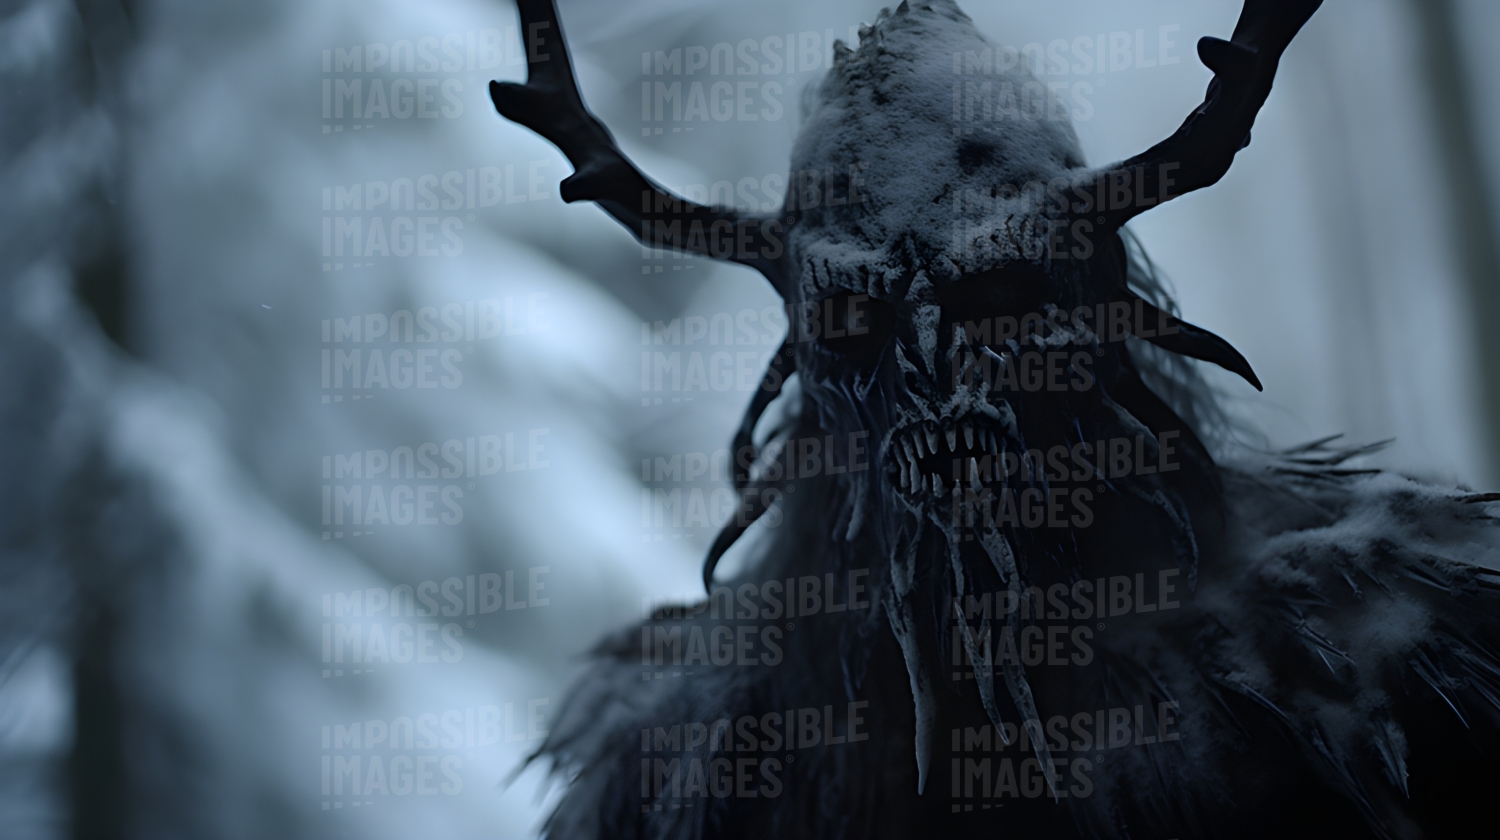 A wendigo in the snowy mountains -  A wendigo, a mythical creature of Native American folklore, lurks in the snowy mountains, waiting to terrorize unsuspecting travelers.